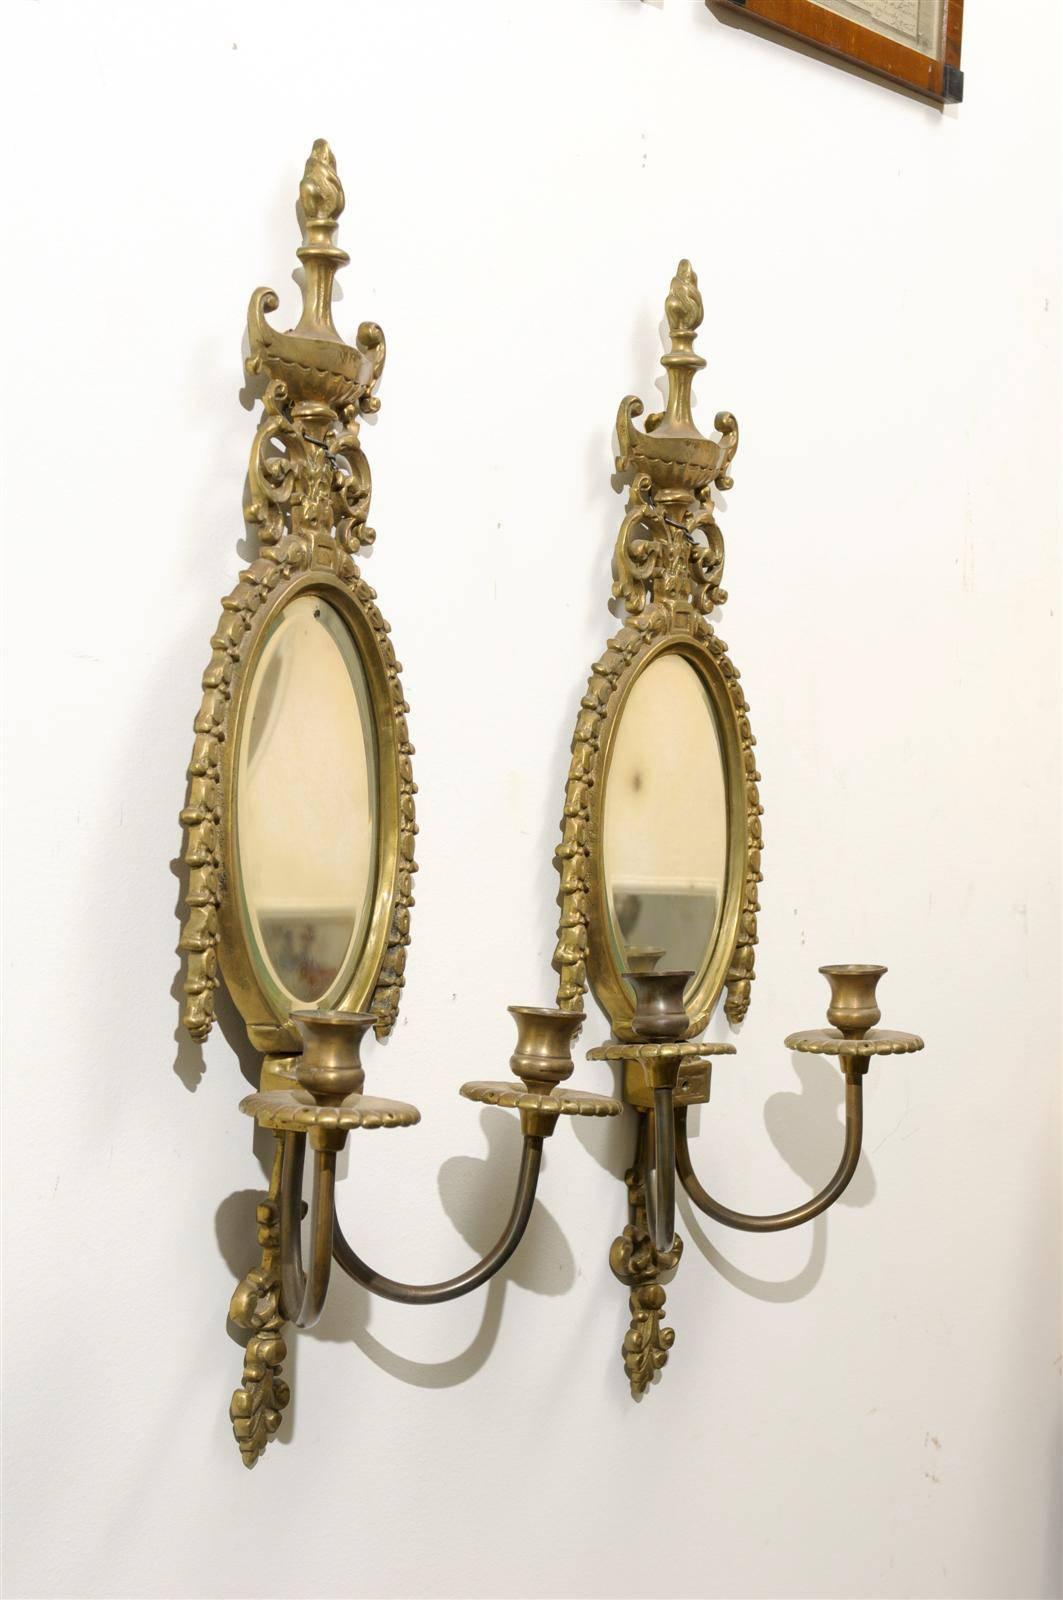 Carved Pair of Early 20th Century Gilded Sconces with Oval Shape and Beveled Mirror